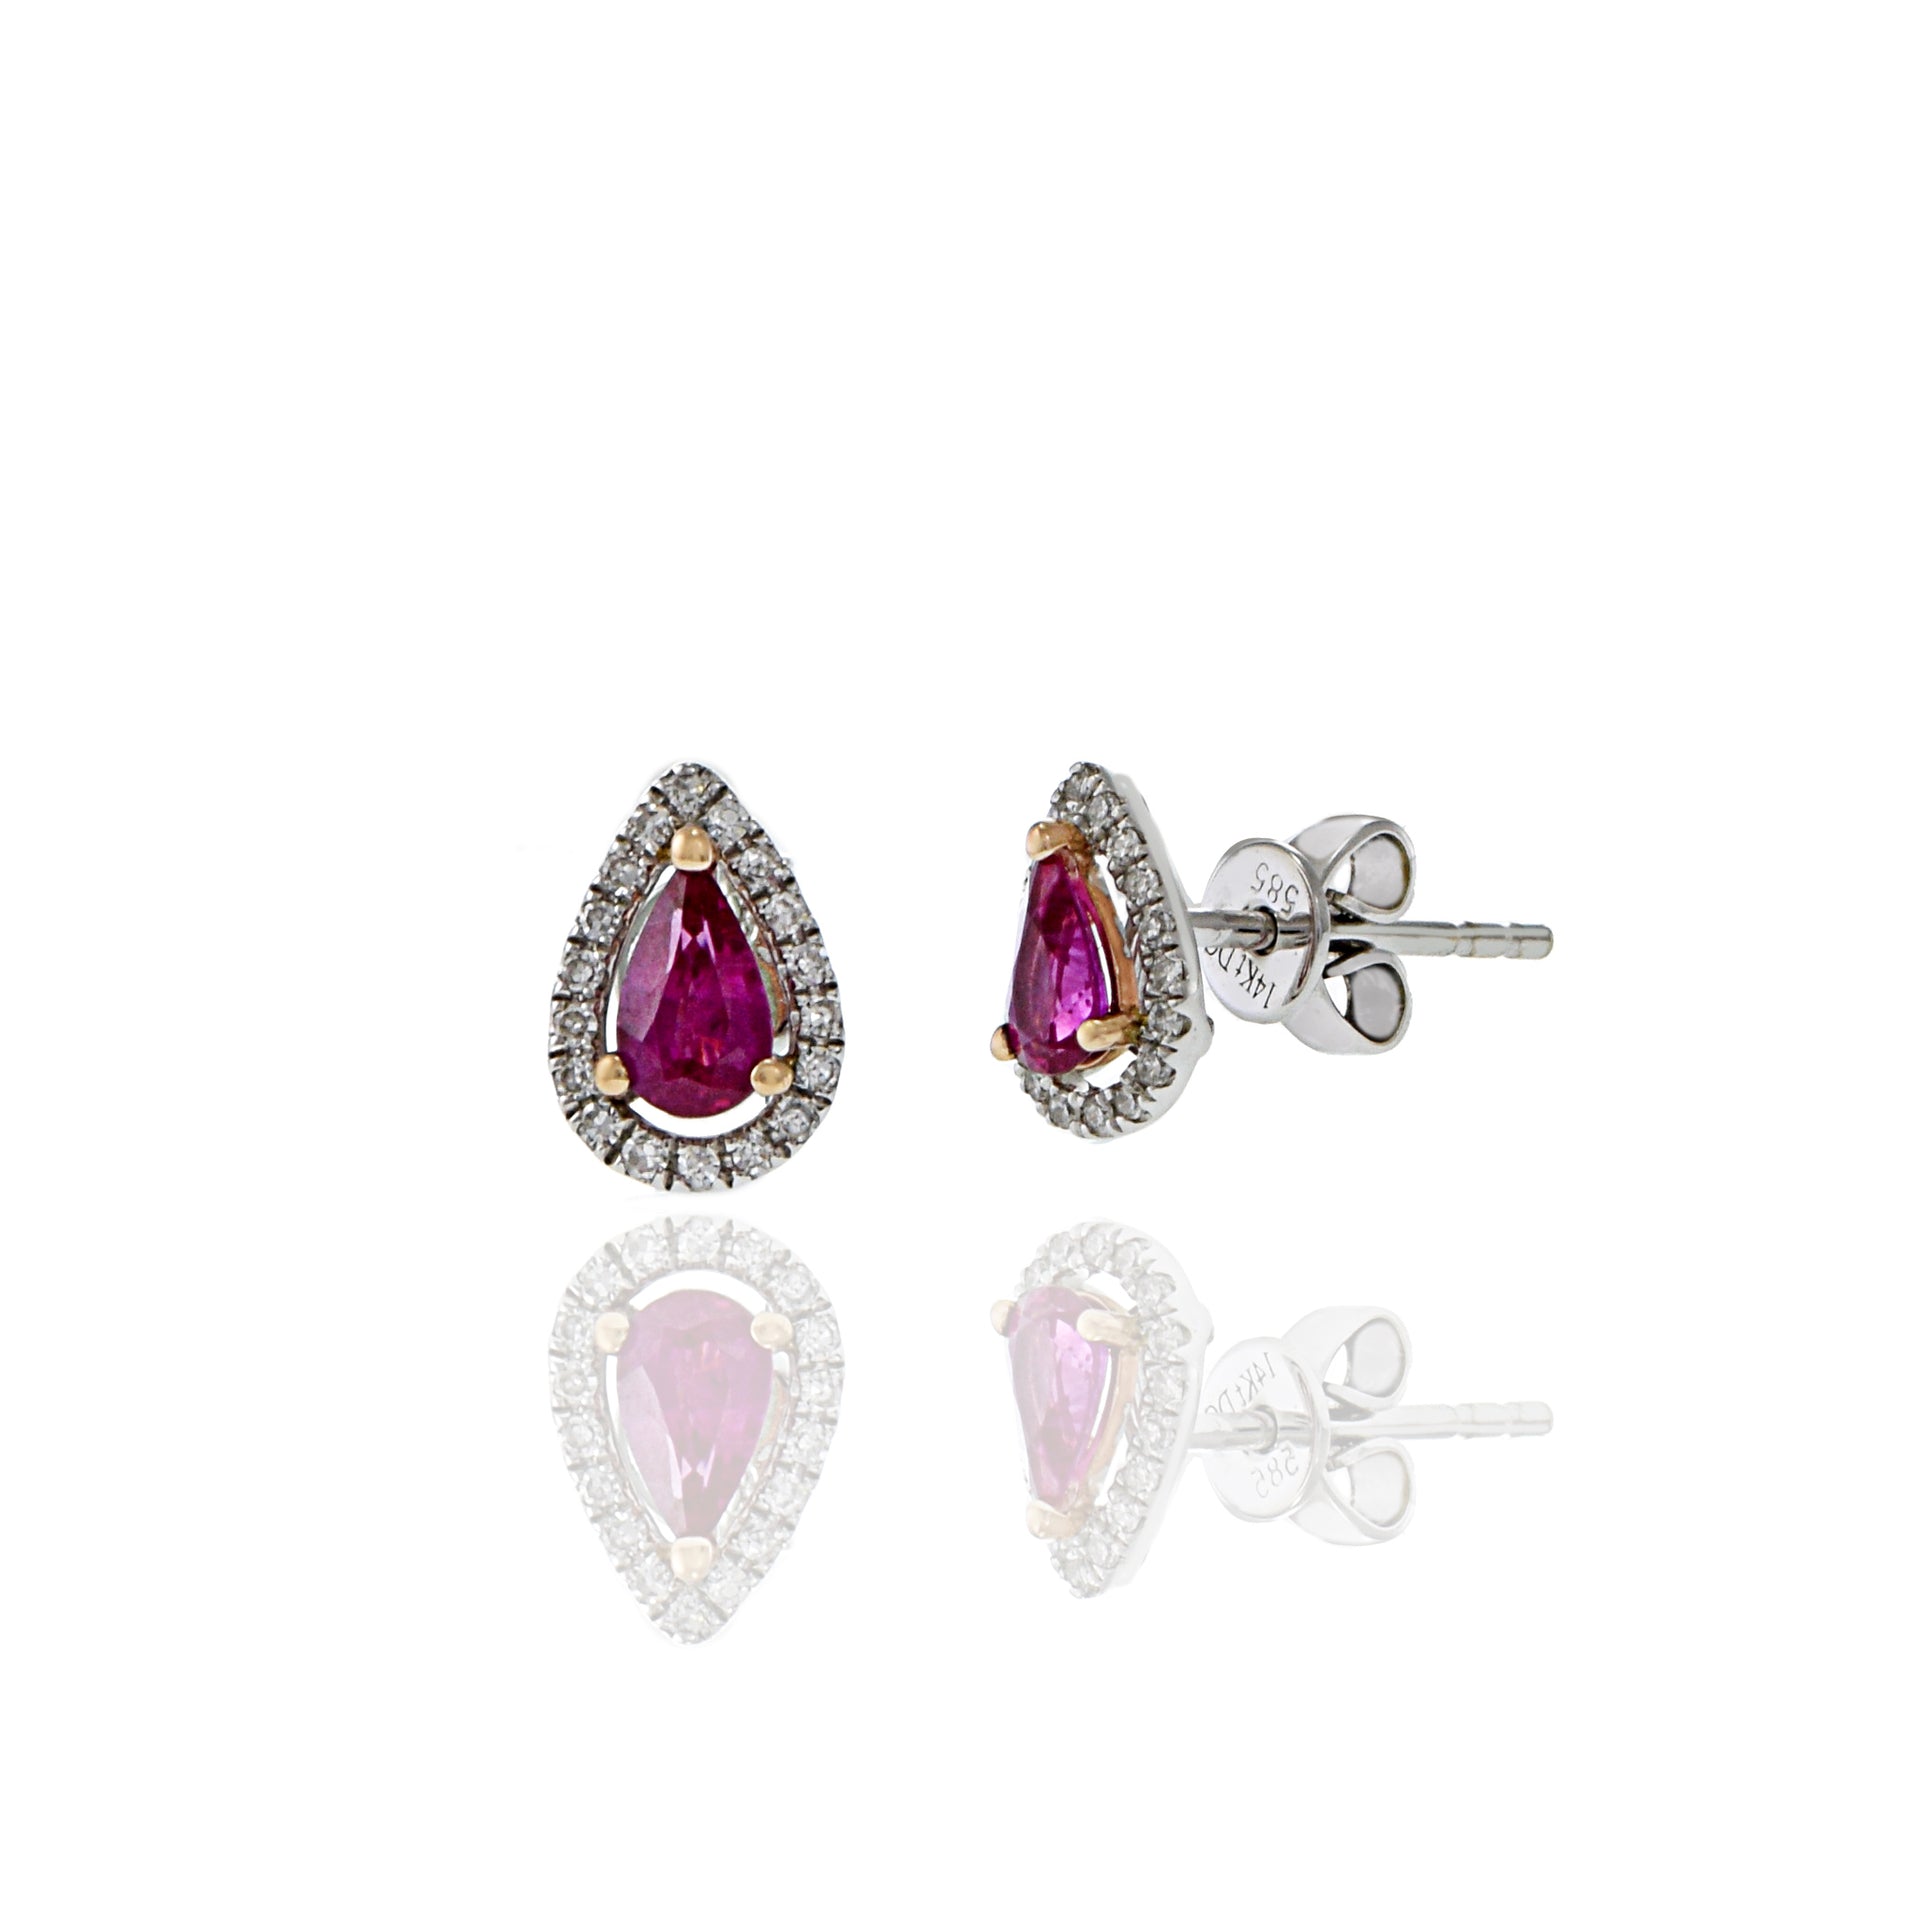 14KT White Gold Ruby And Diamond Earrings